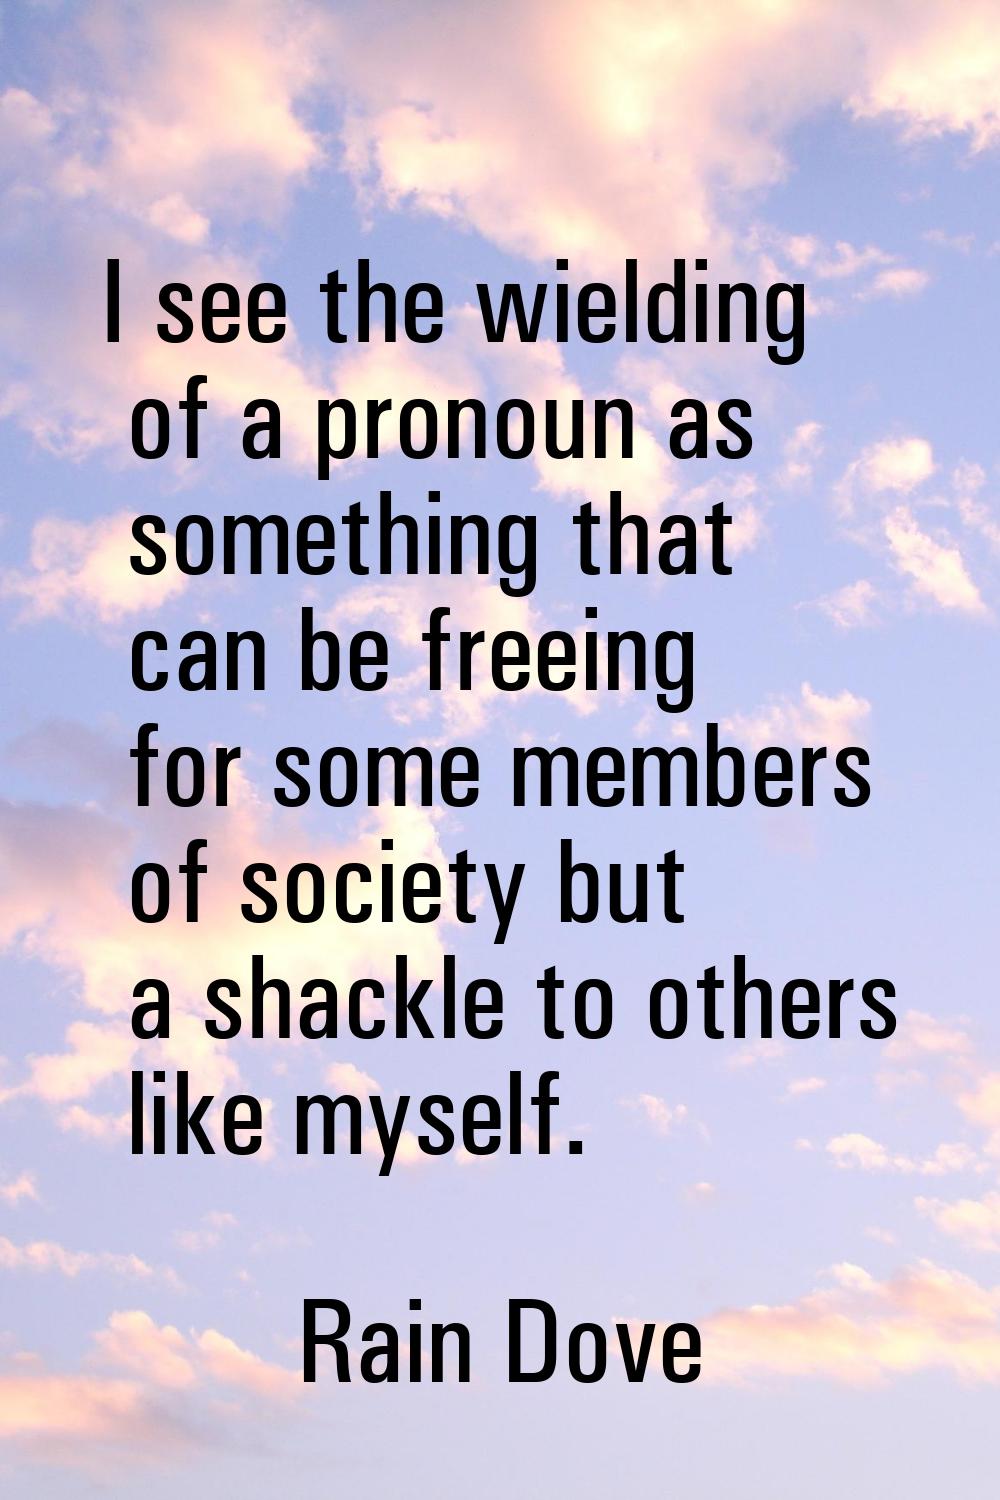 I see the wielding of a pronoun as something that can be freeing for some members of society but a 